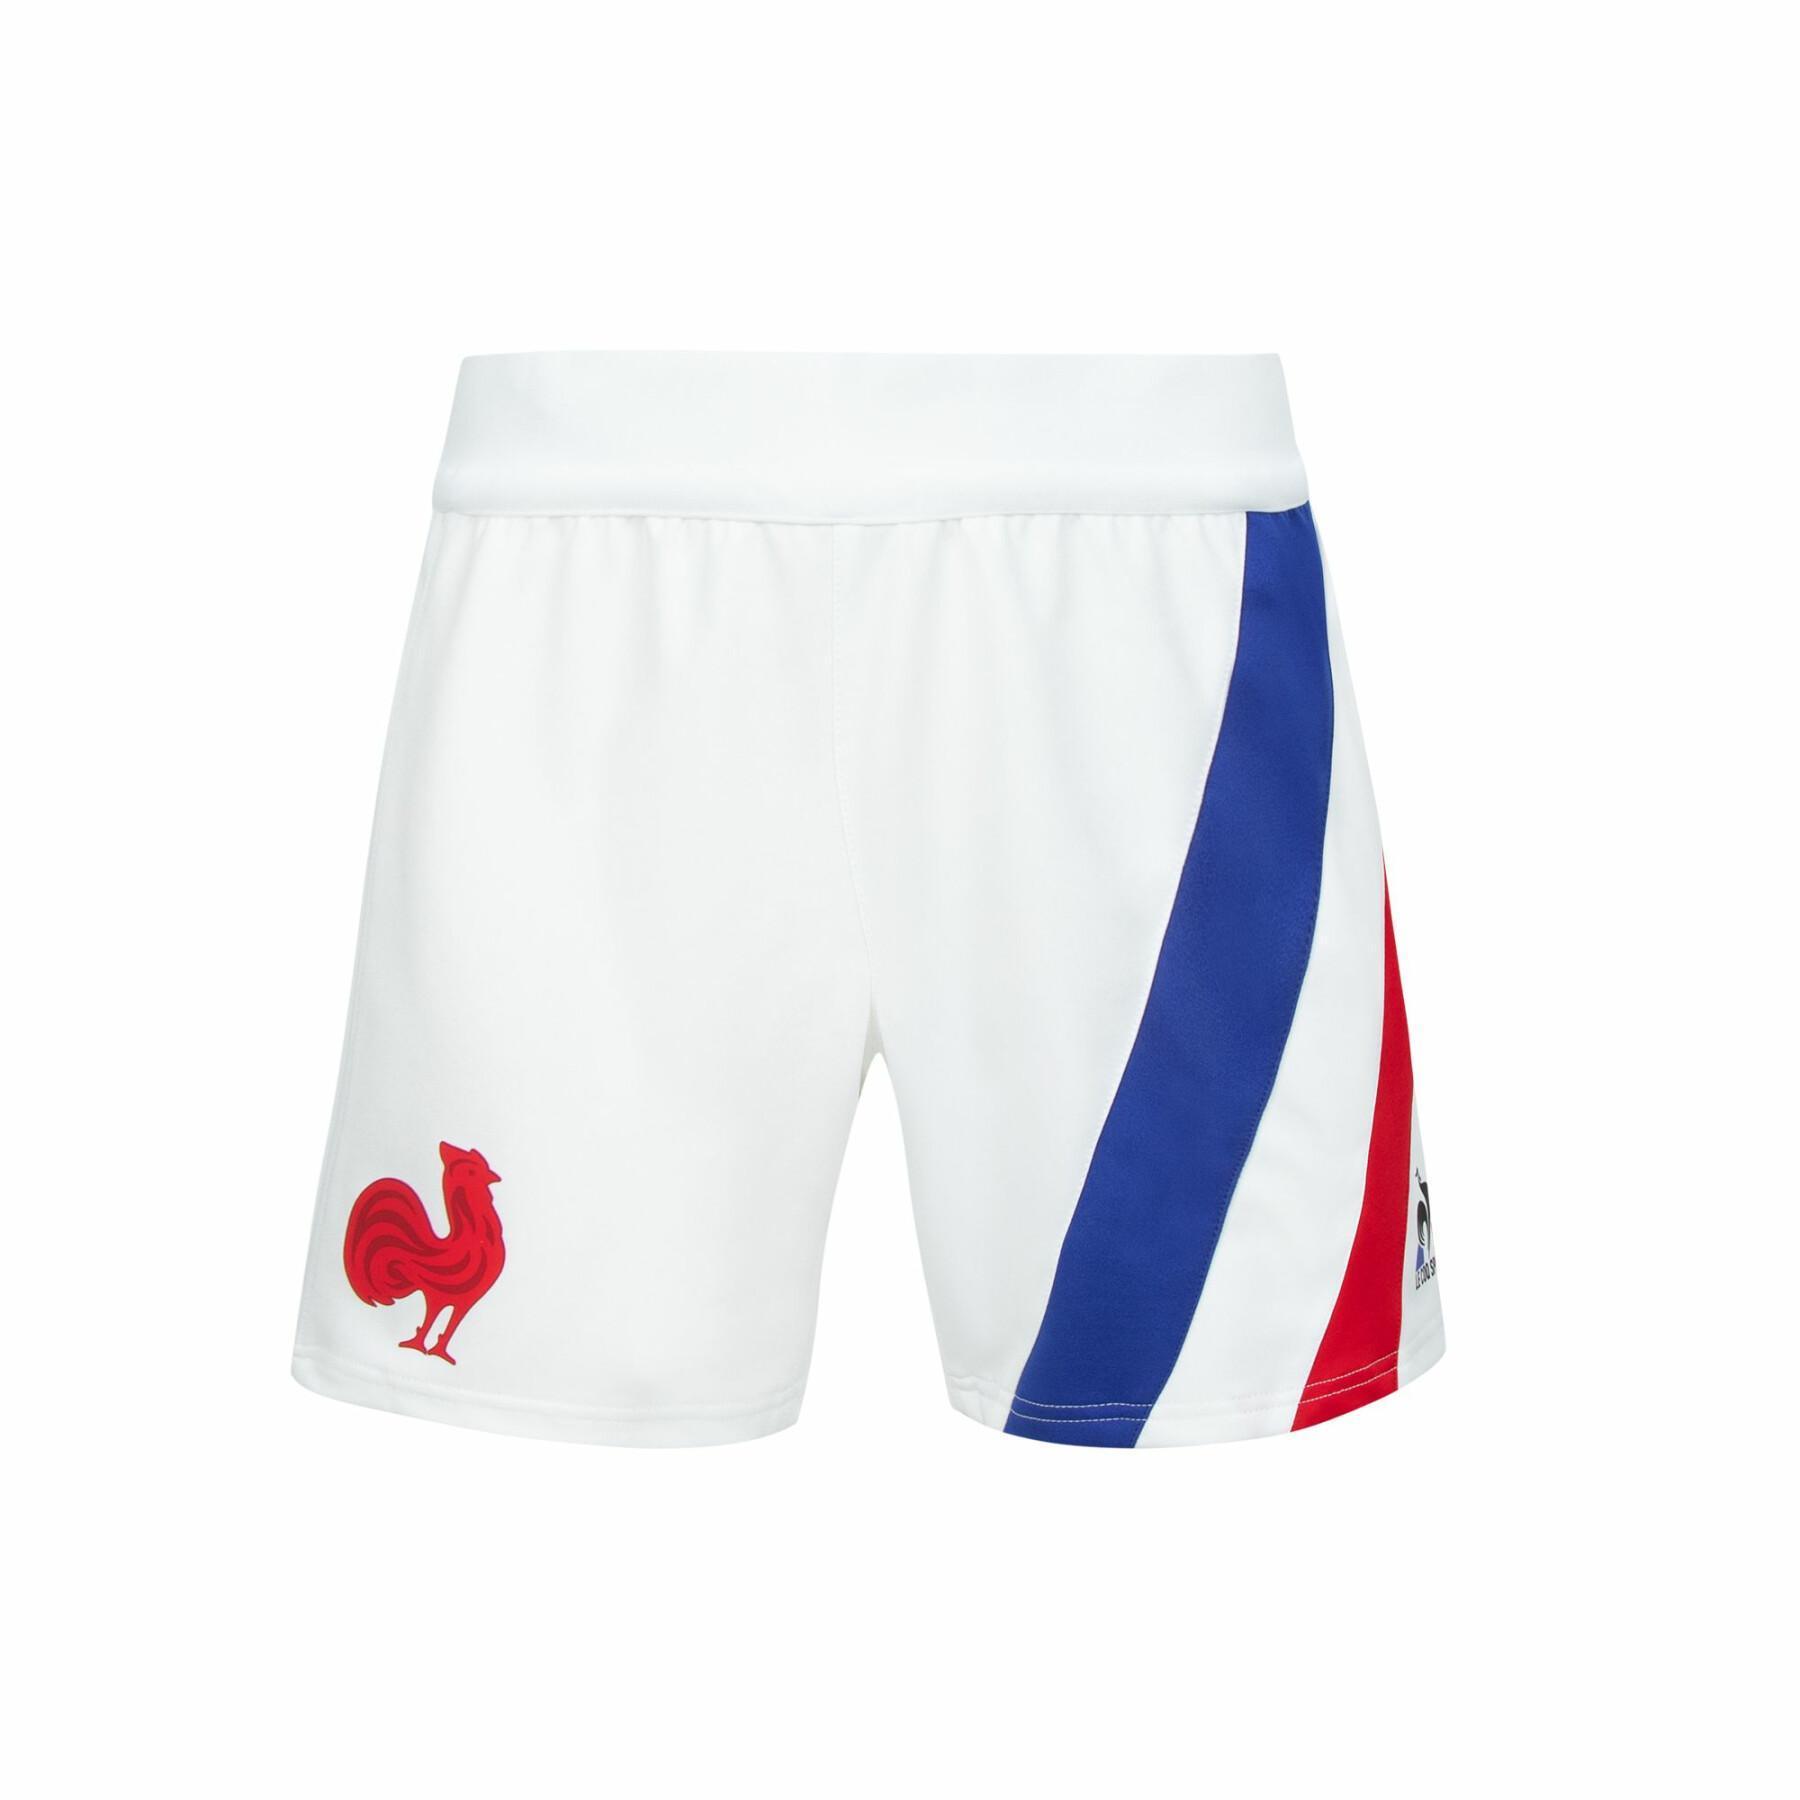 xv outdoor shorts from France 2021/22